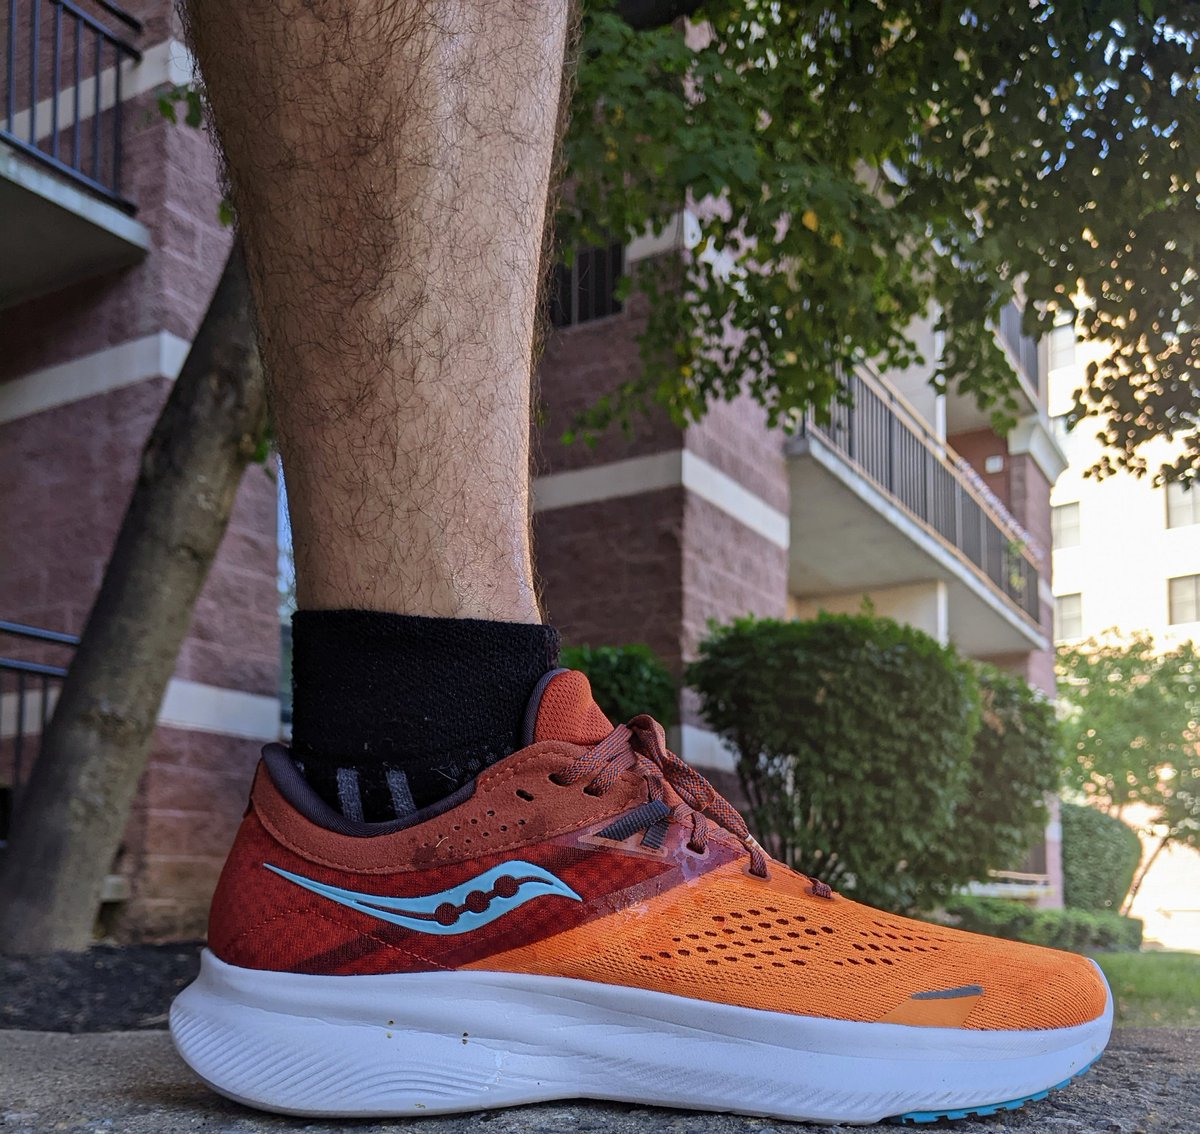 New shoe day! The first run in new shoes is always exciting and the weather was great too! There should be more orange shoes in the world.
#fitness #newshoes #saucony #runforgood